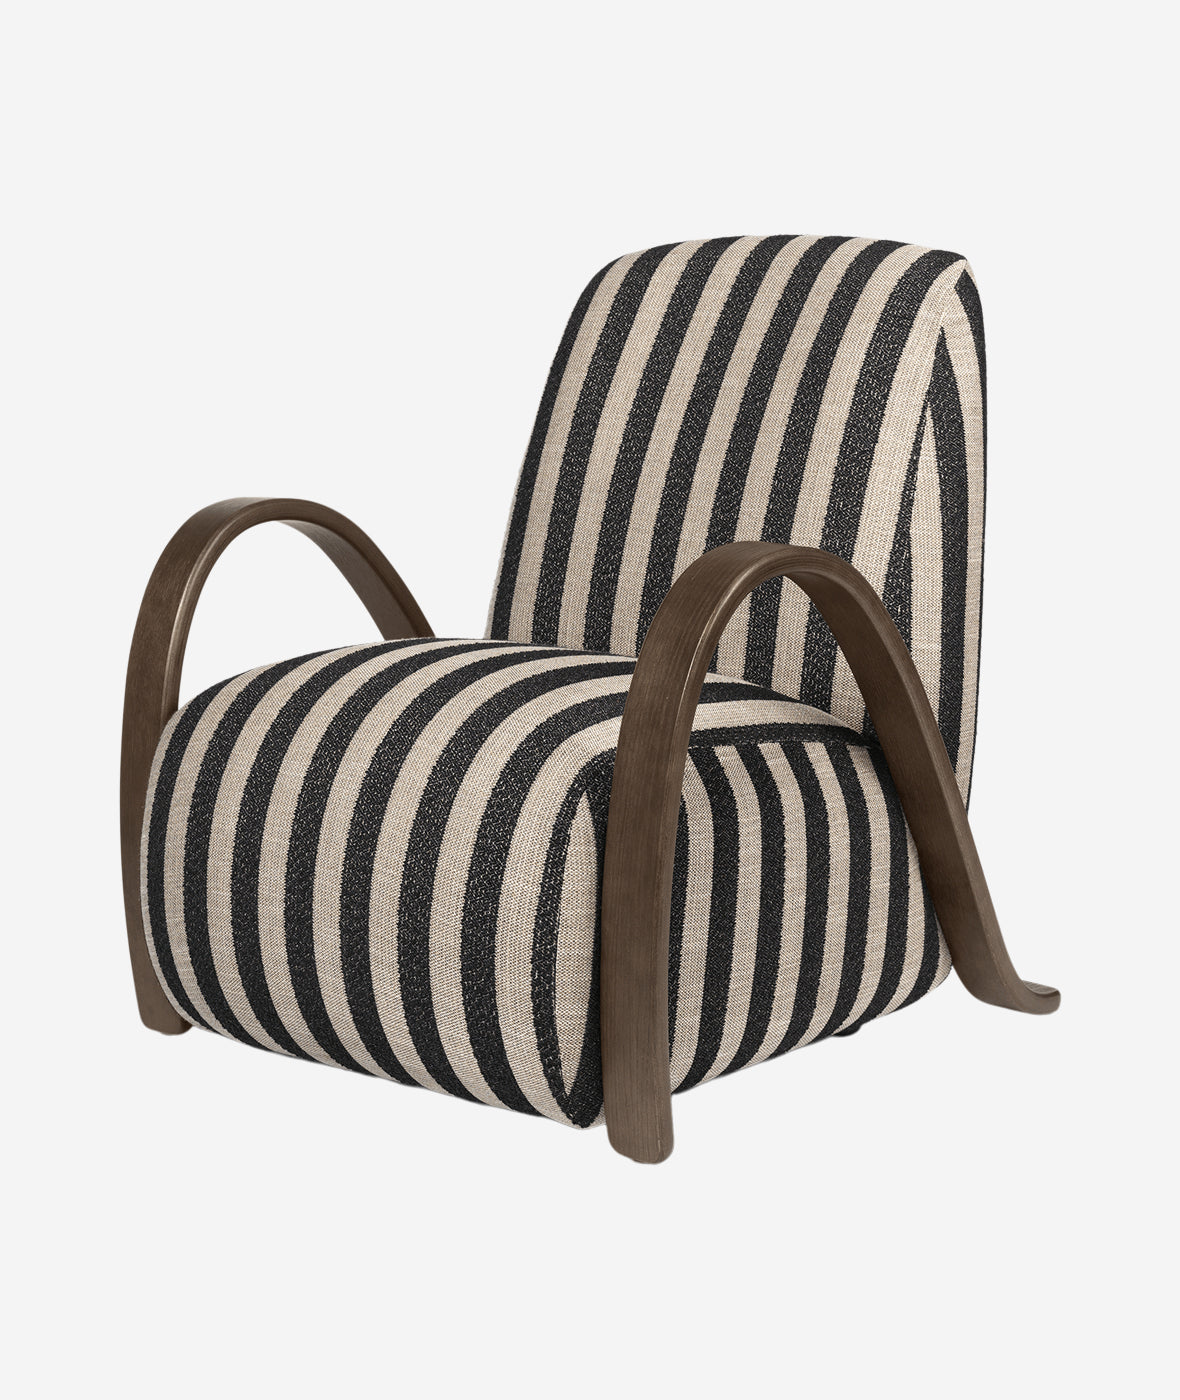 Buur Lounge Chair - More Options